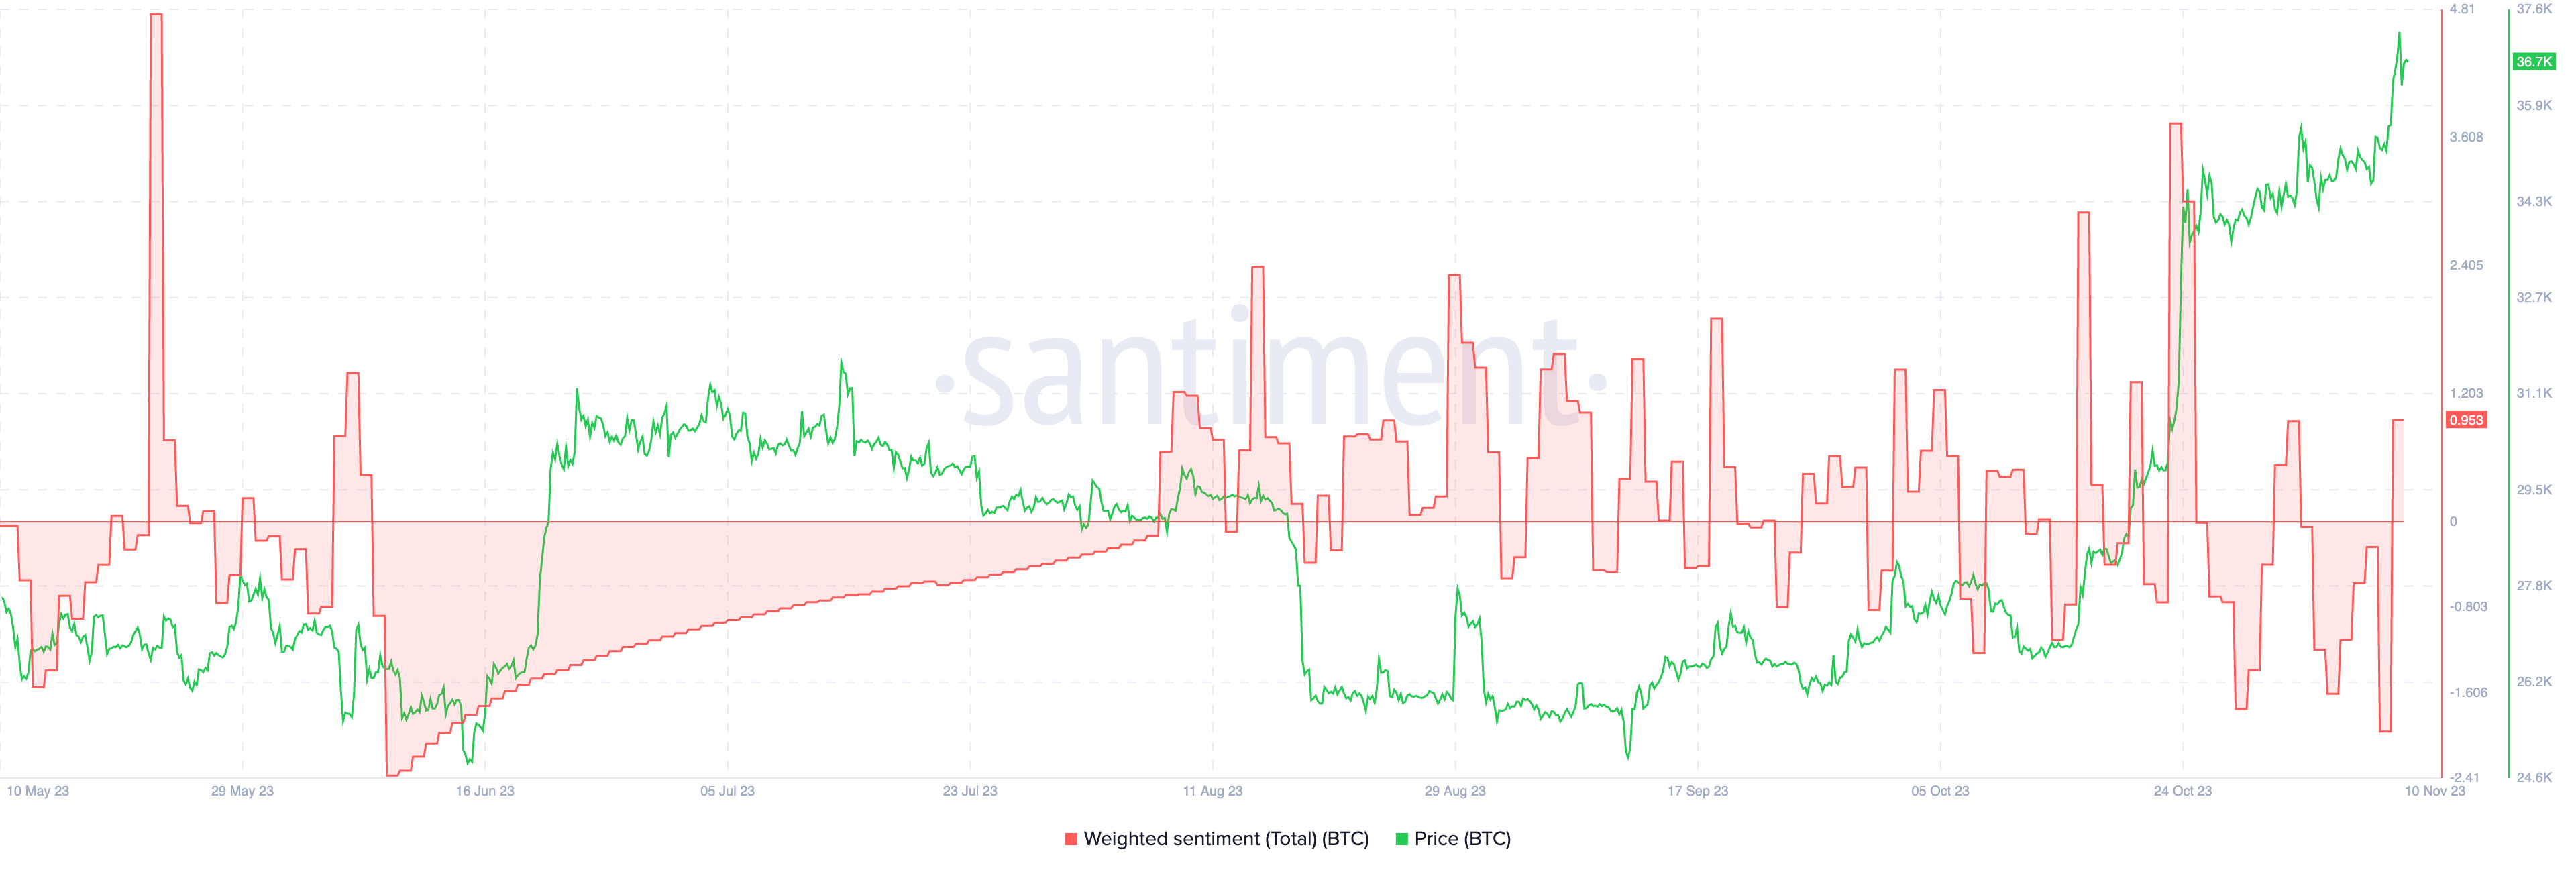 Weighted sentiment and BTC price